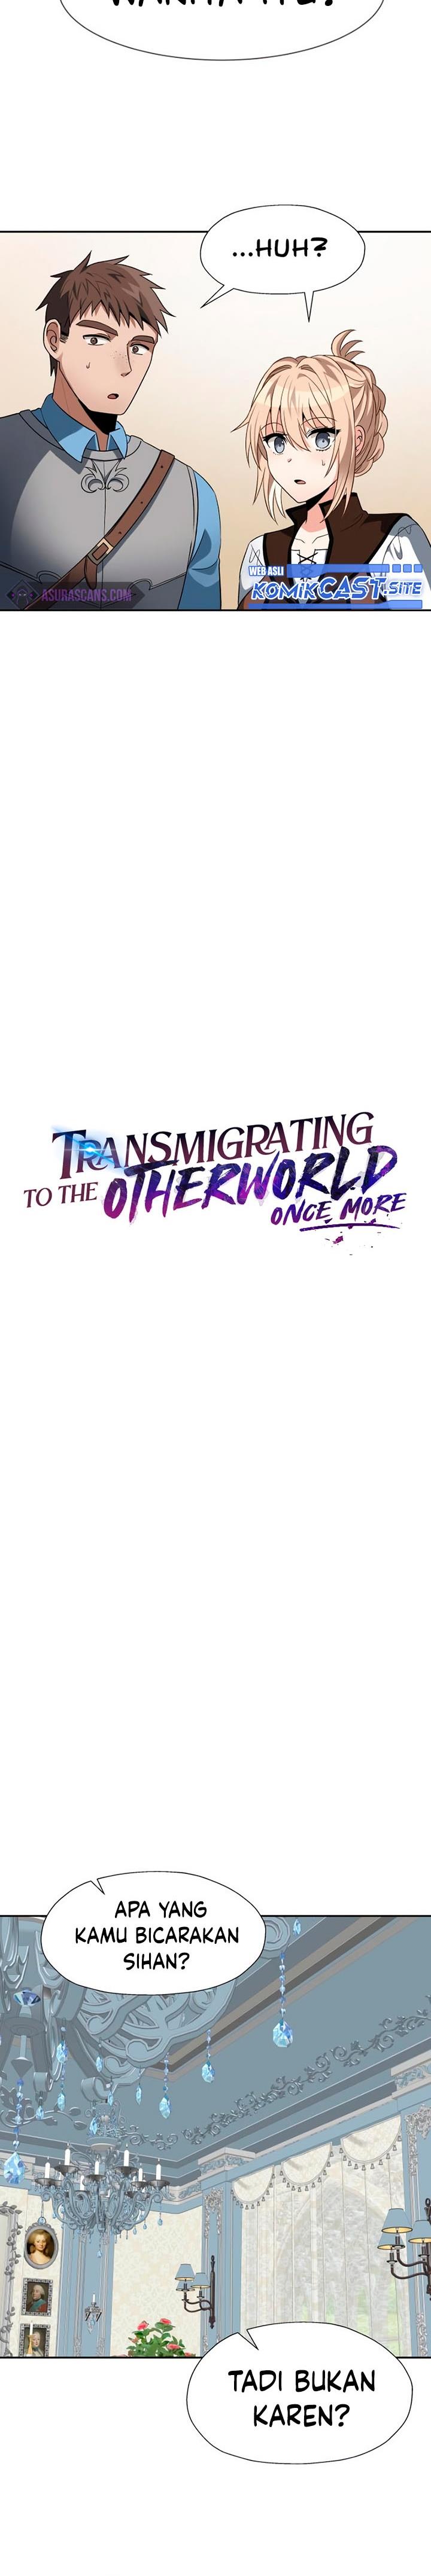 Transmigrating to the Otherworld Once More Chapter 44